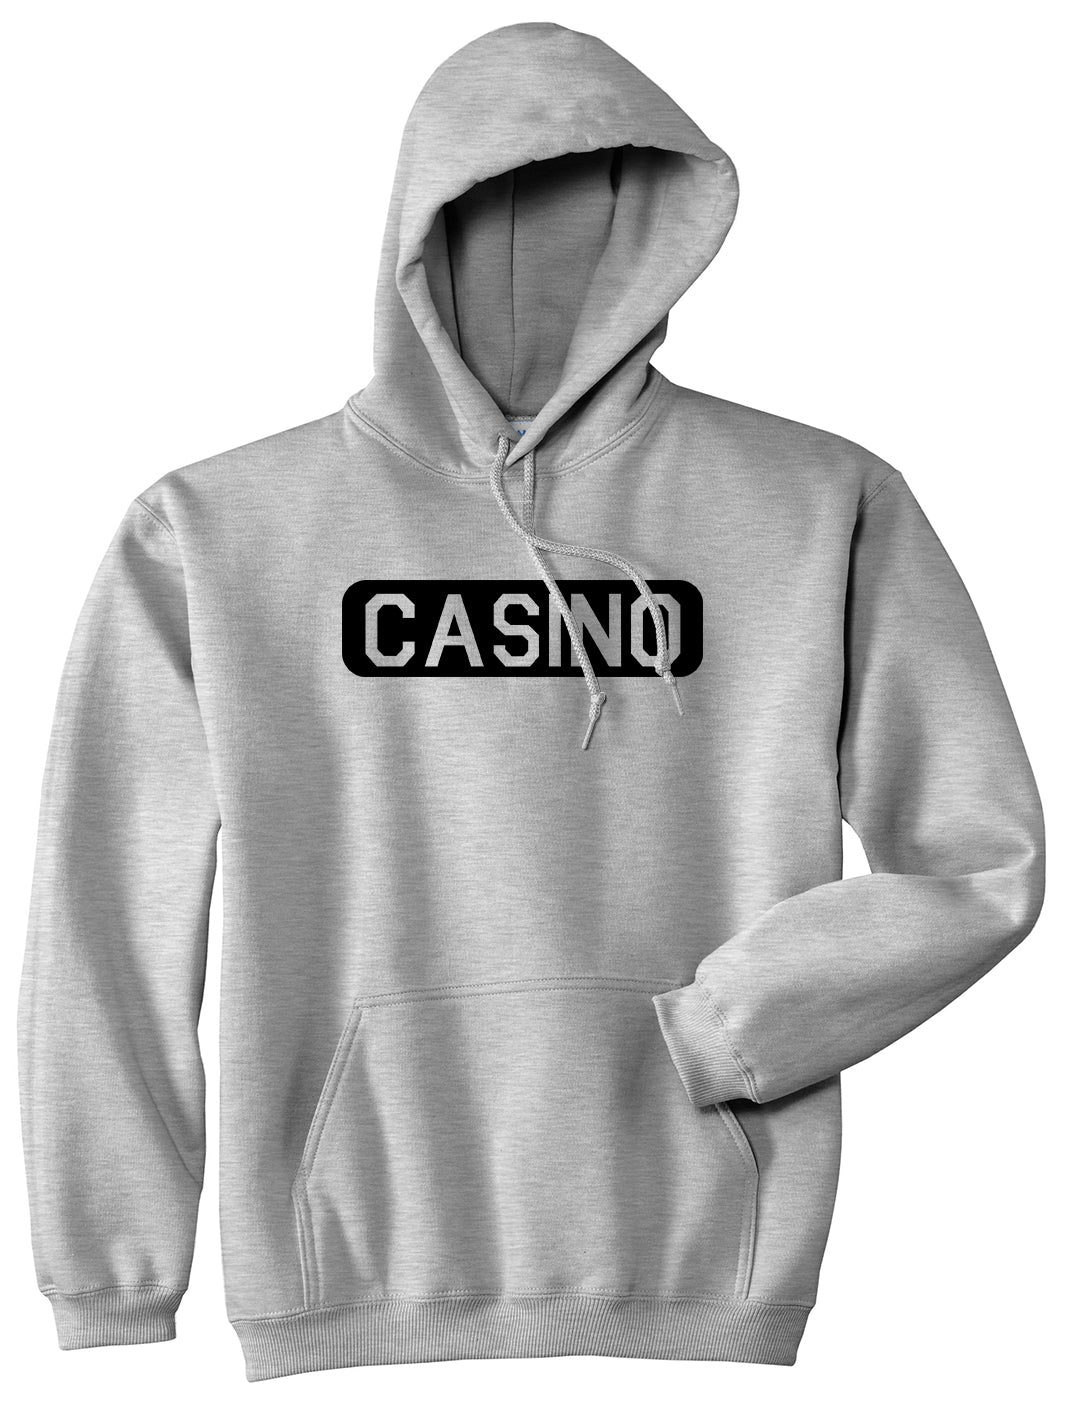 Casino Grey Pullover Hoodie by Kings Of NY